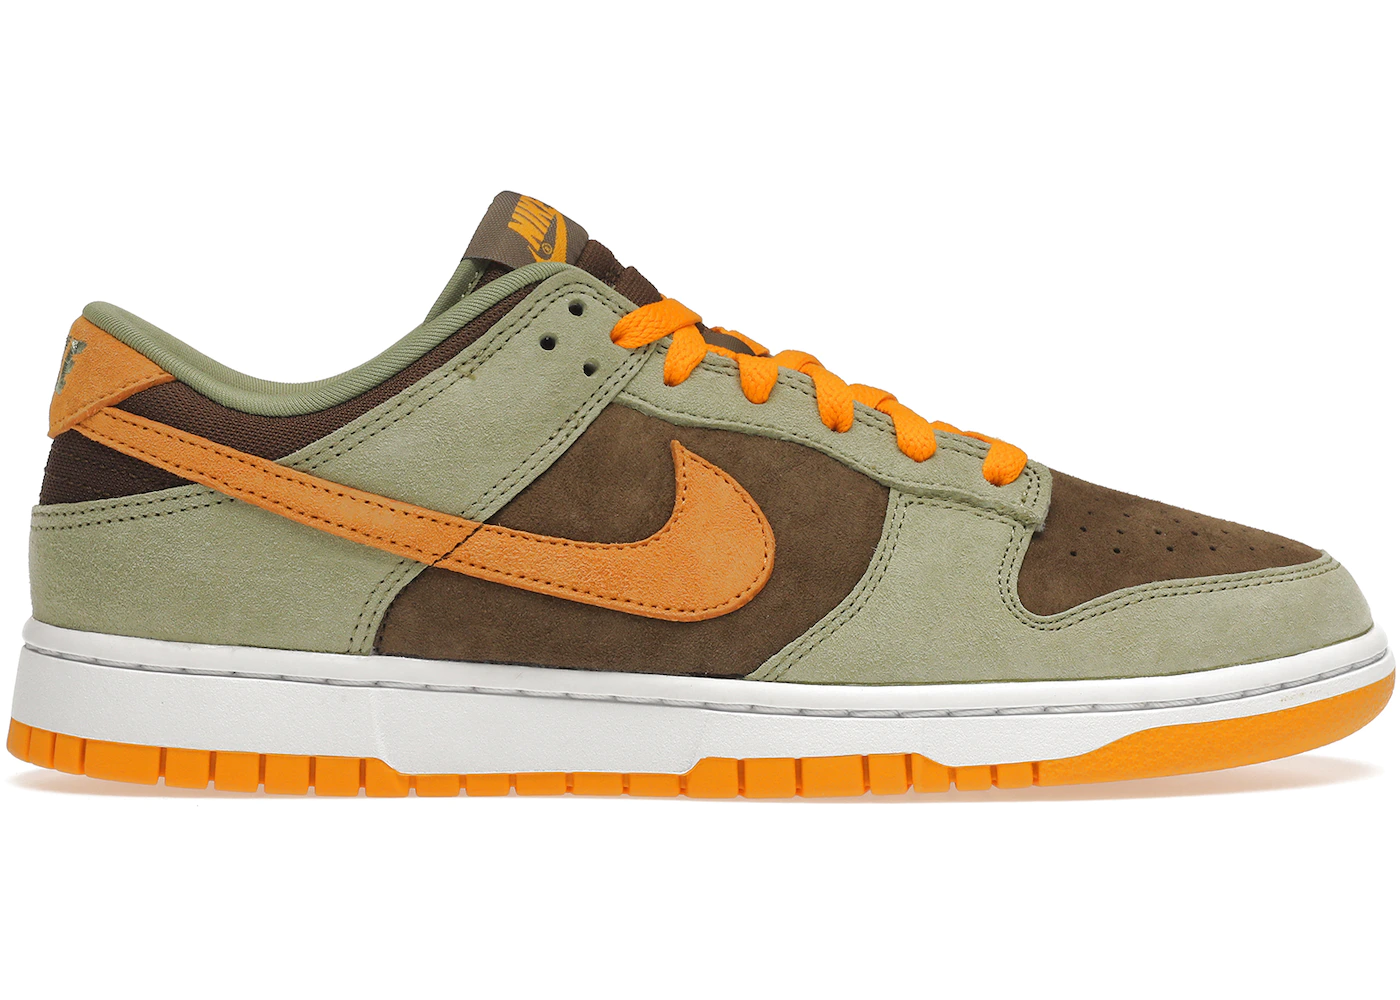 Nike Dunk Low Dusty Olive (2021/2023) Men's - DH5360-300 - US